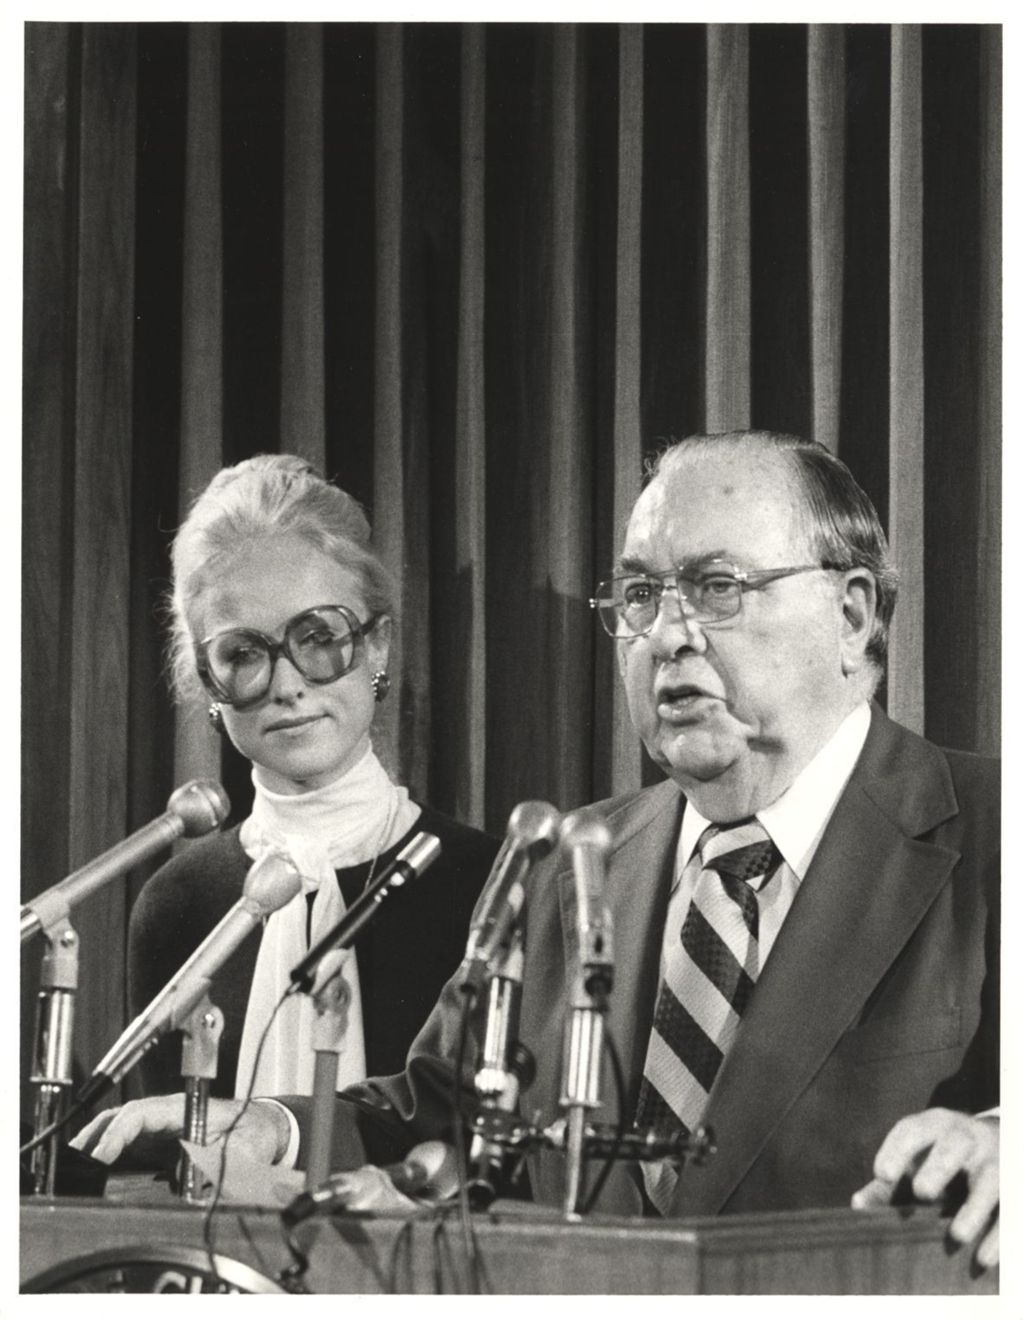 Miniature of Richard J. Daley with Heather Morgan at a press conference